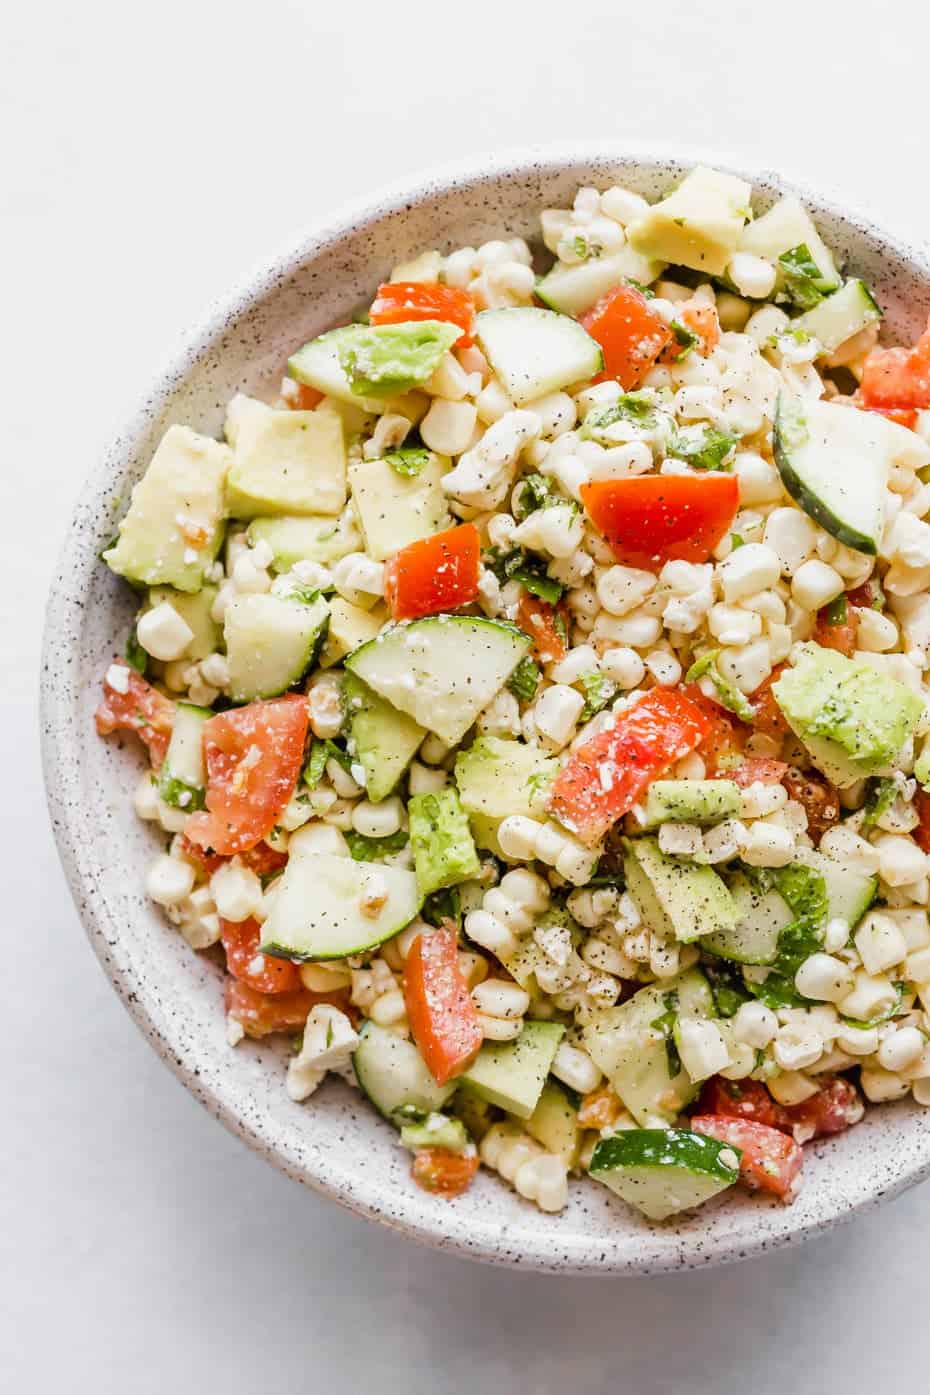 Close up image of a feta corn salad with chopped tomatoes, cucumber, corn, mint, and avocado.